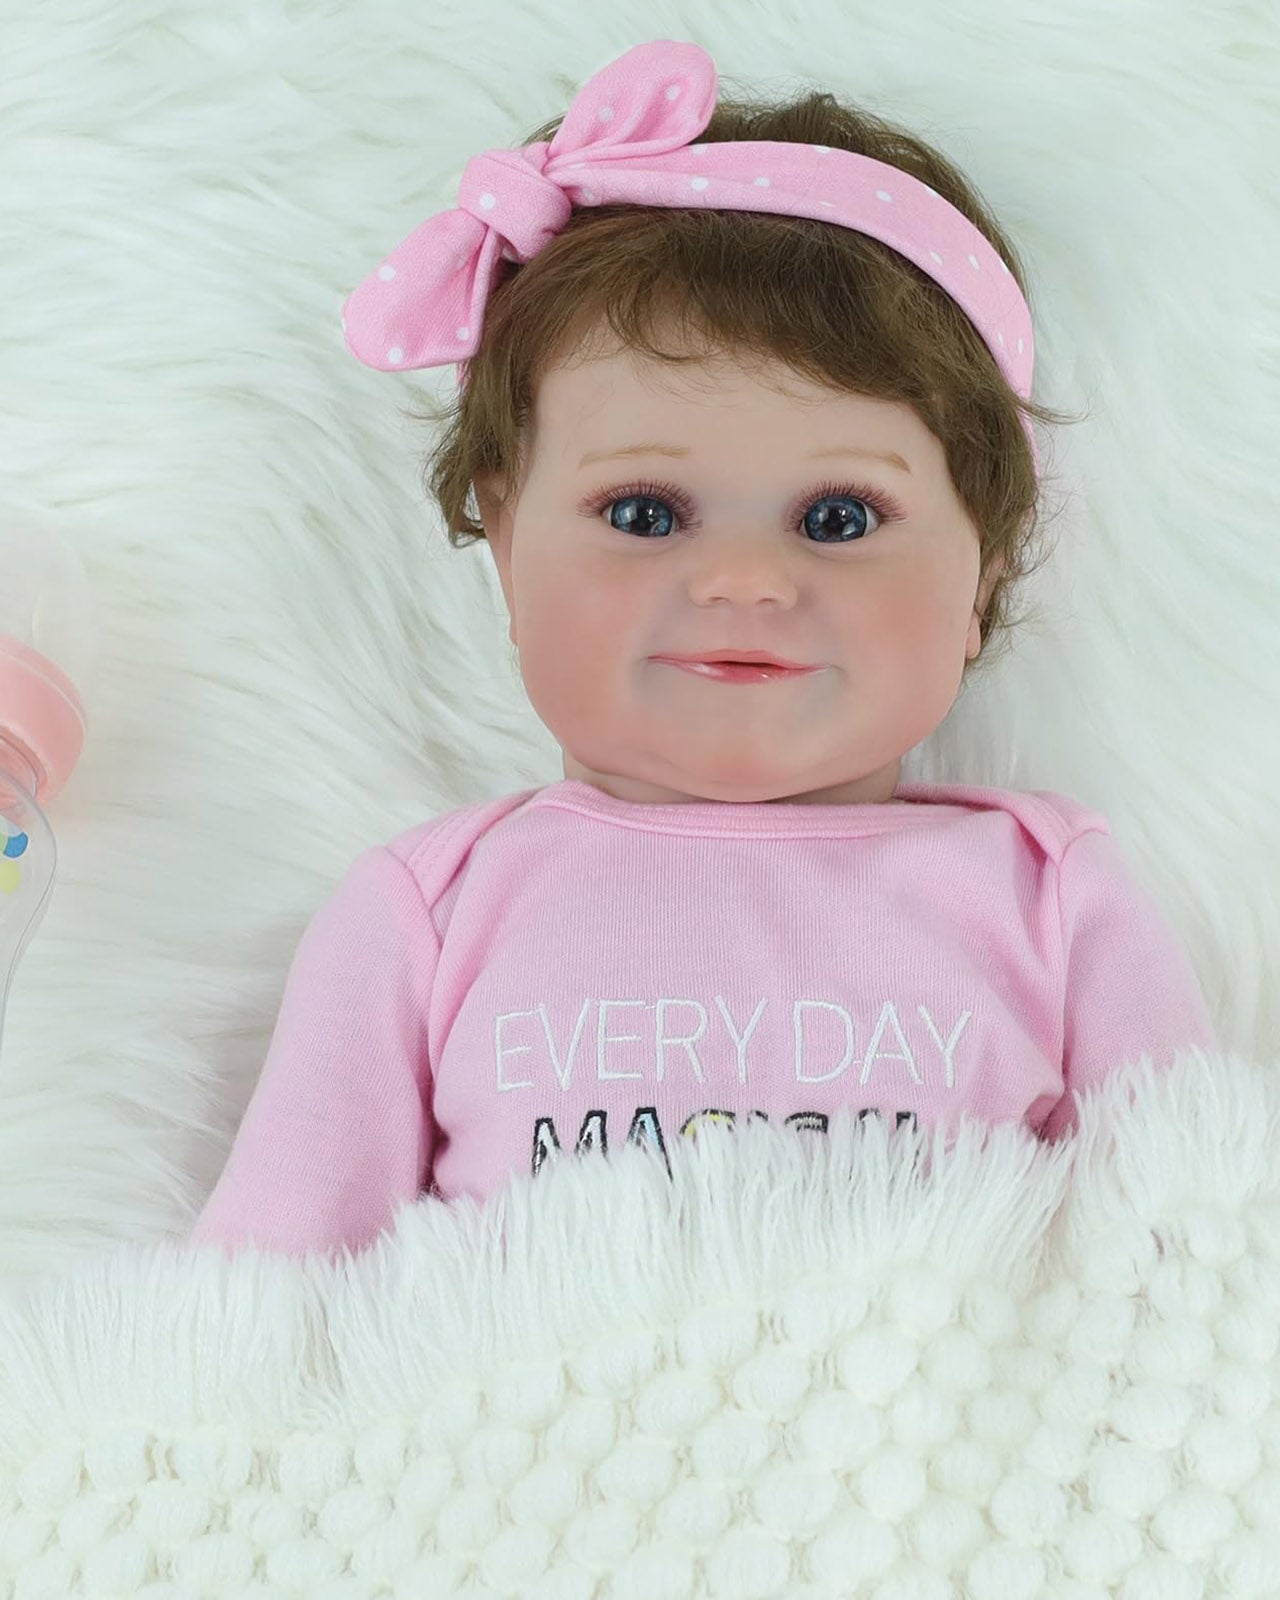 Elly - 20" Reborn Baby Dolls Look Real Newborn Girl With Sweet Smile